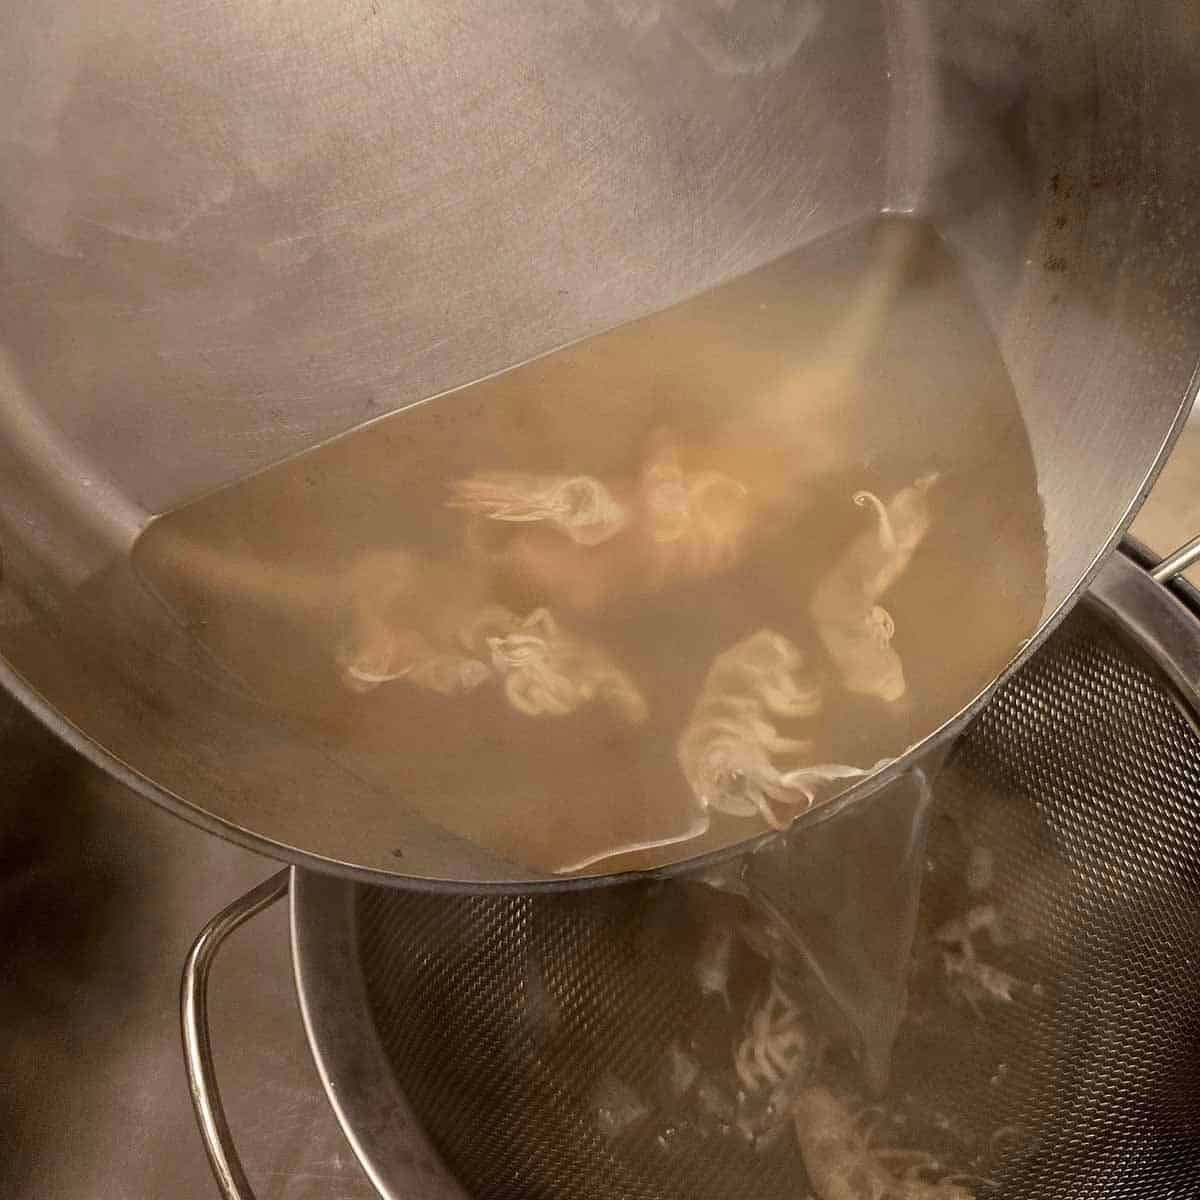 Straining shrimp shells from clear broth over a kitchen sink, using a metal sieve